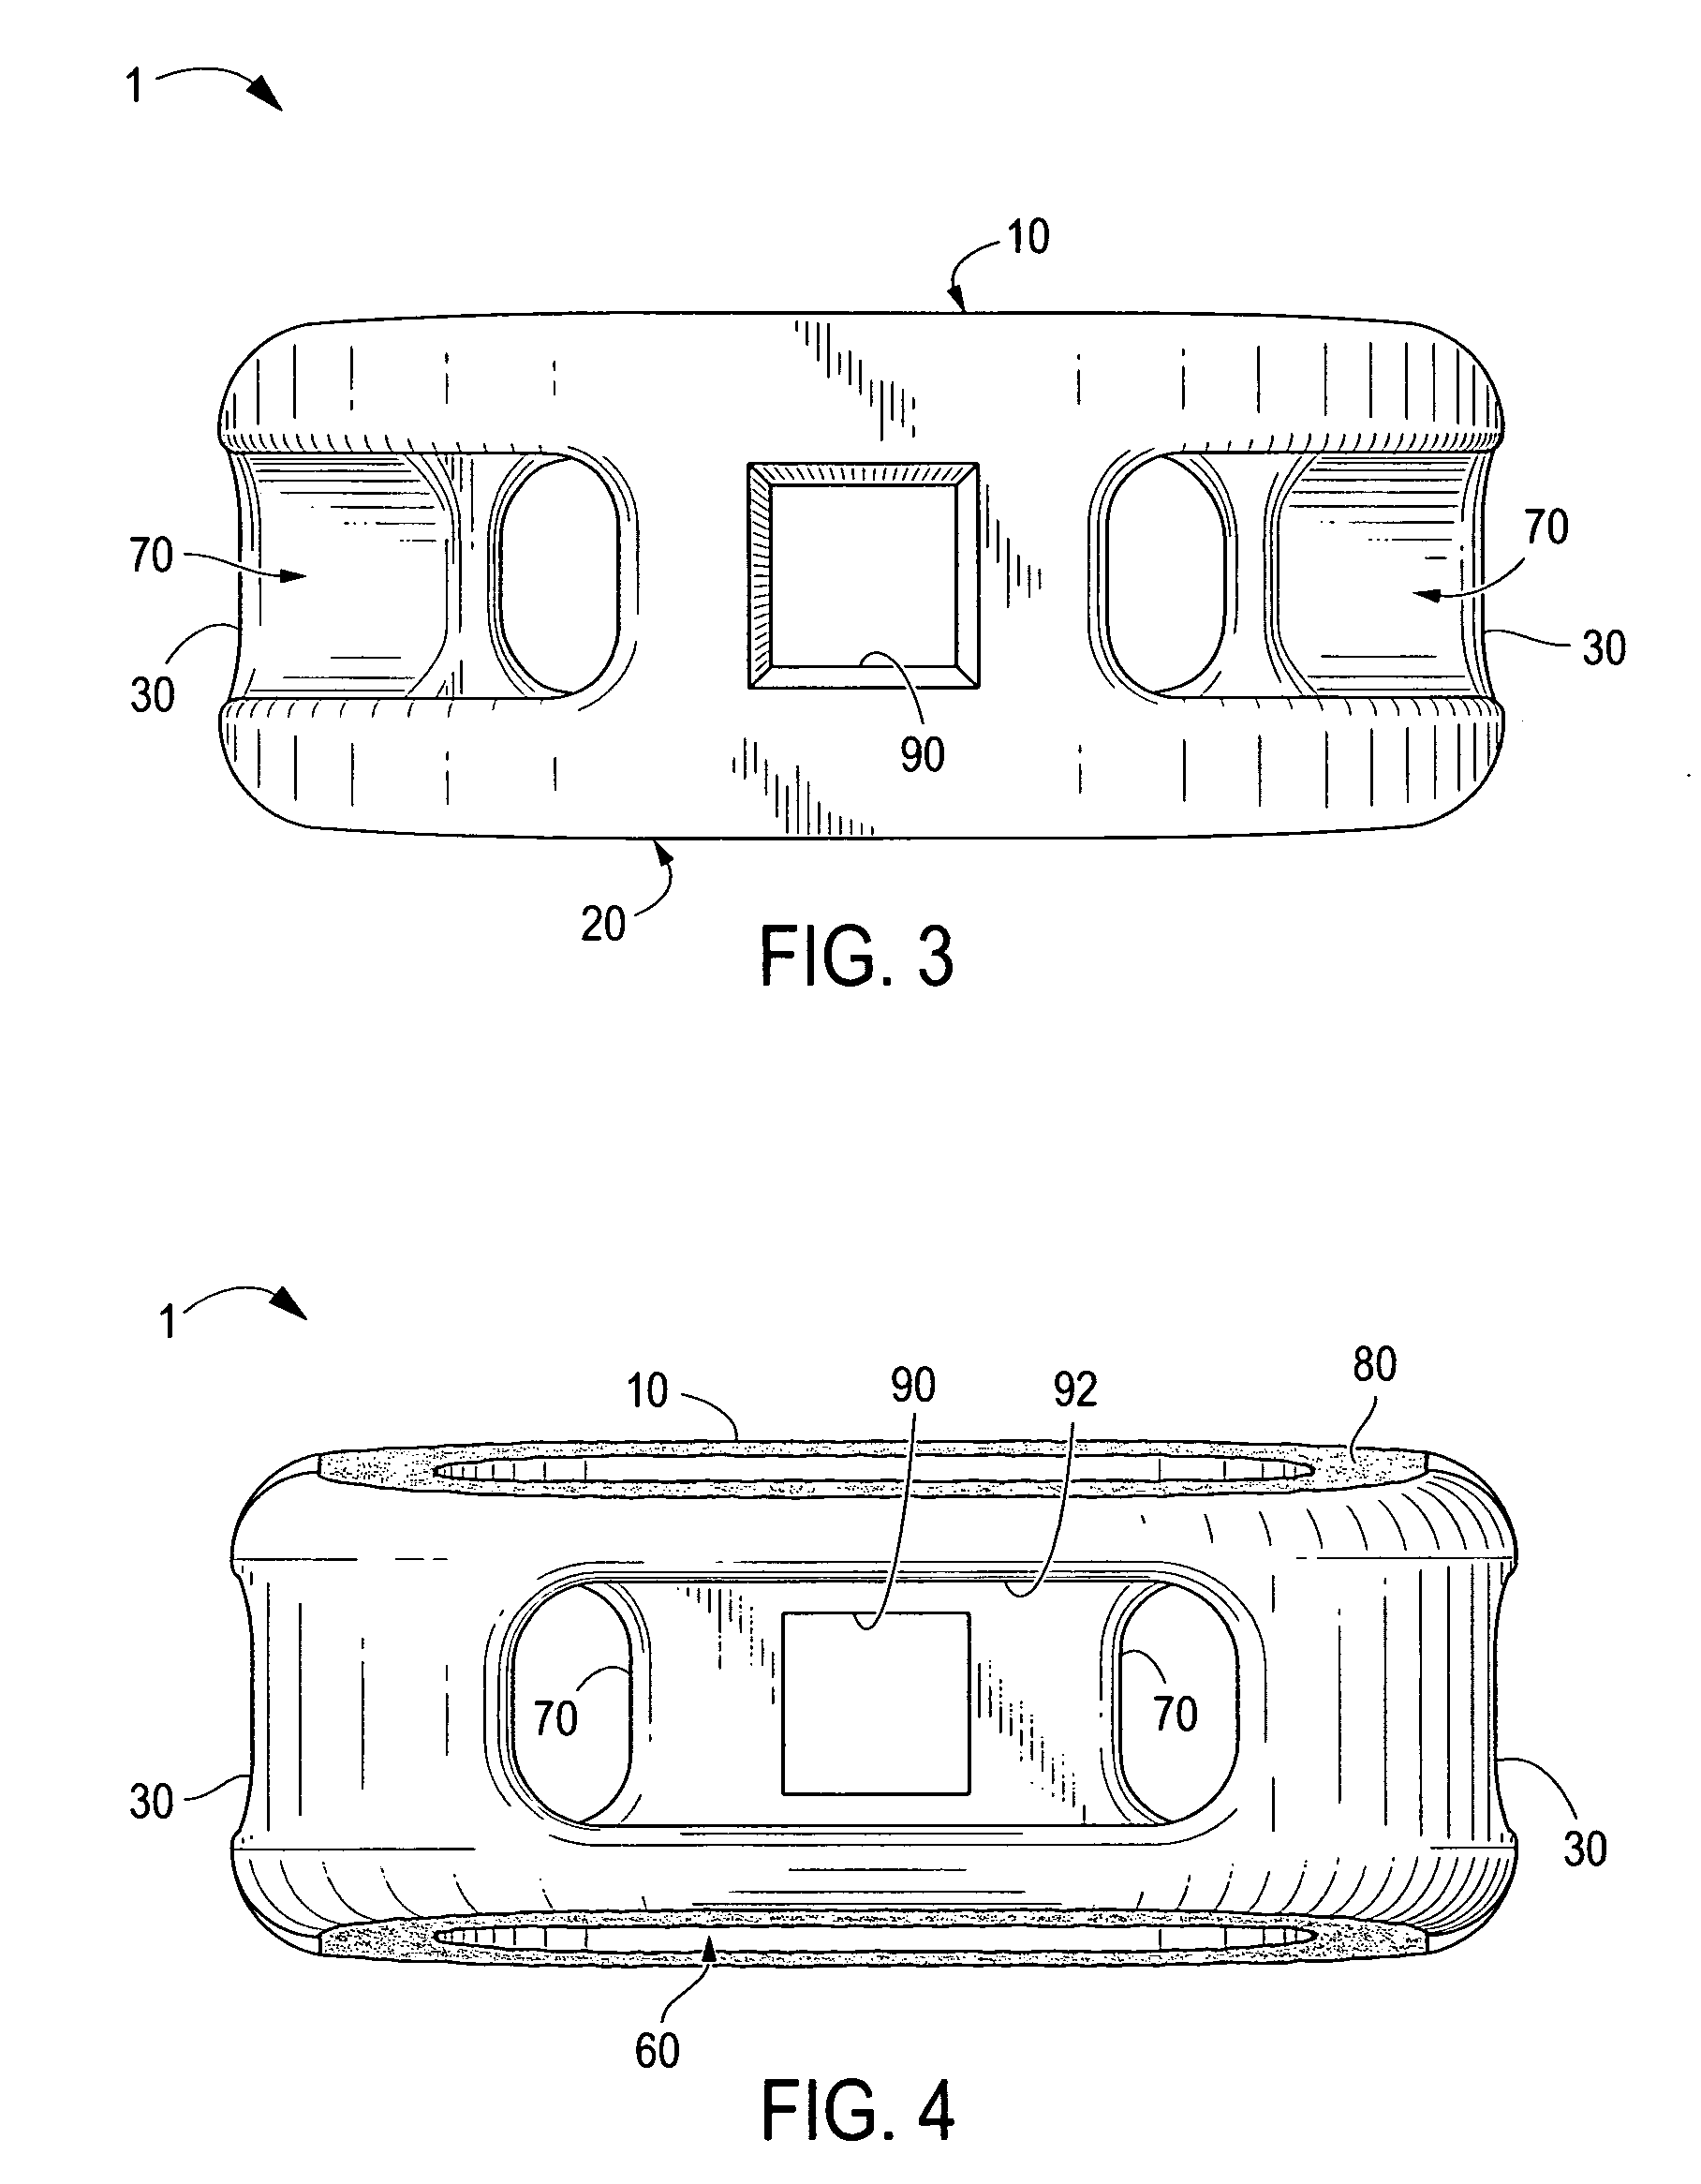 Composite interbody spinal implant having openings of predetermined size and shape